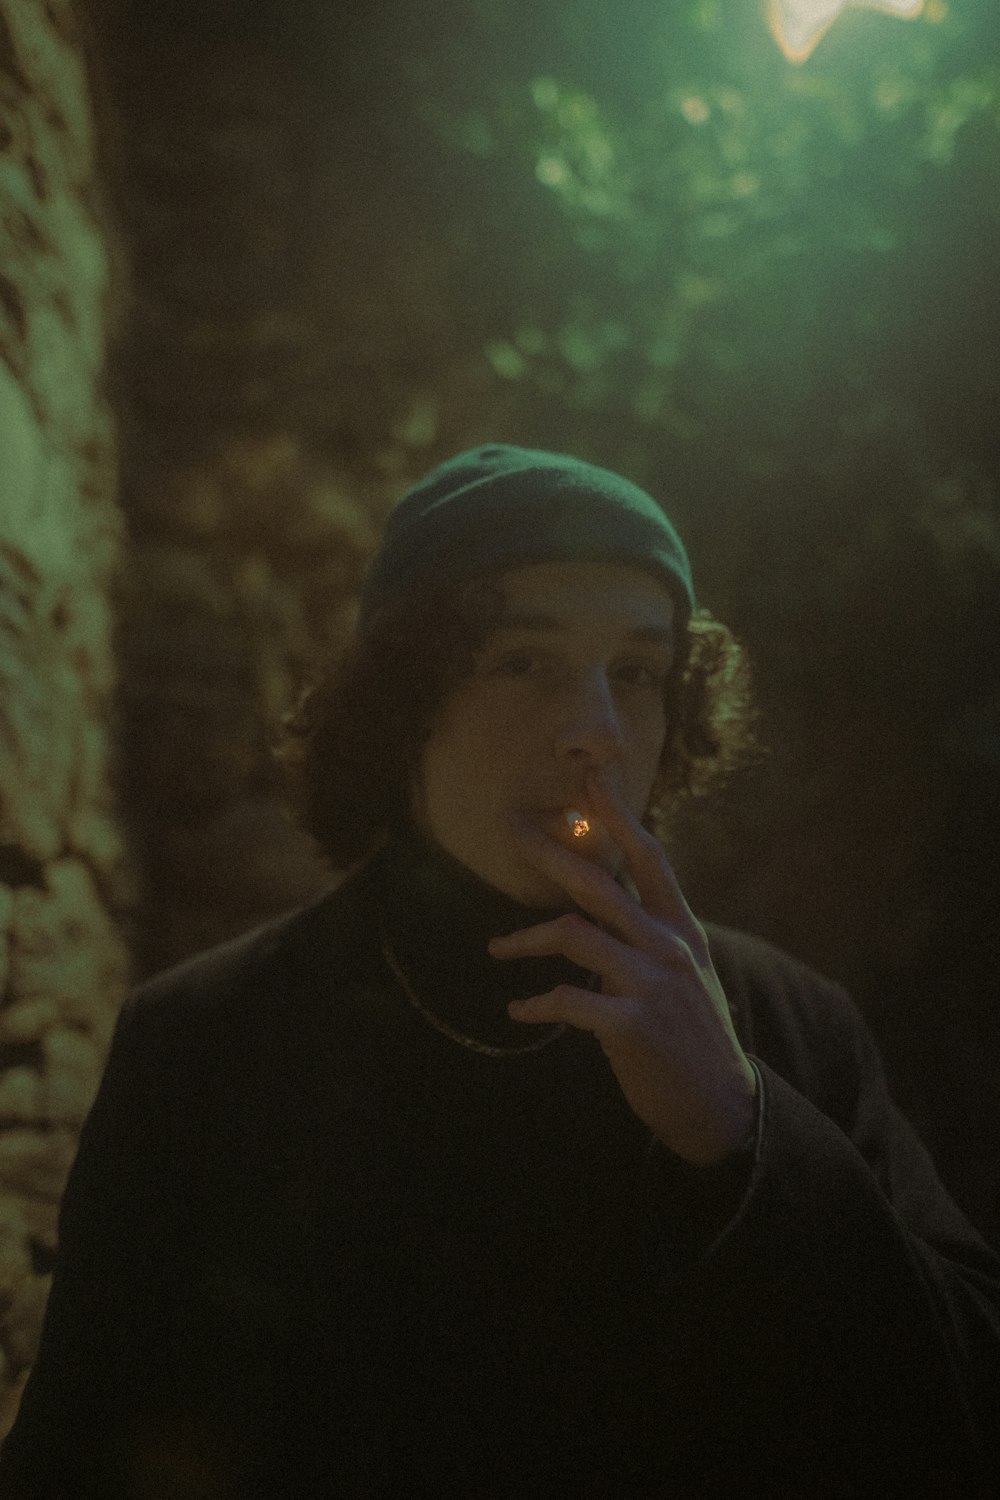 a young man smoking a cigarette in the dark